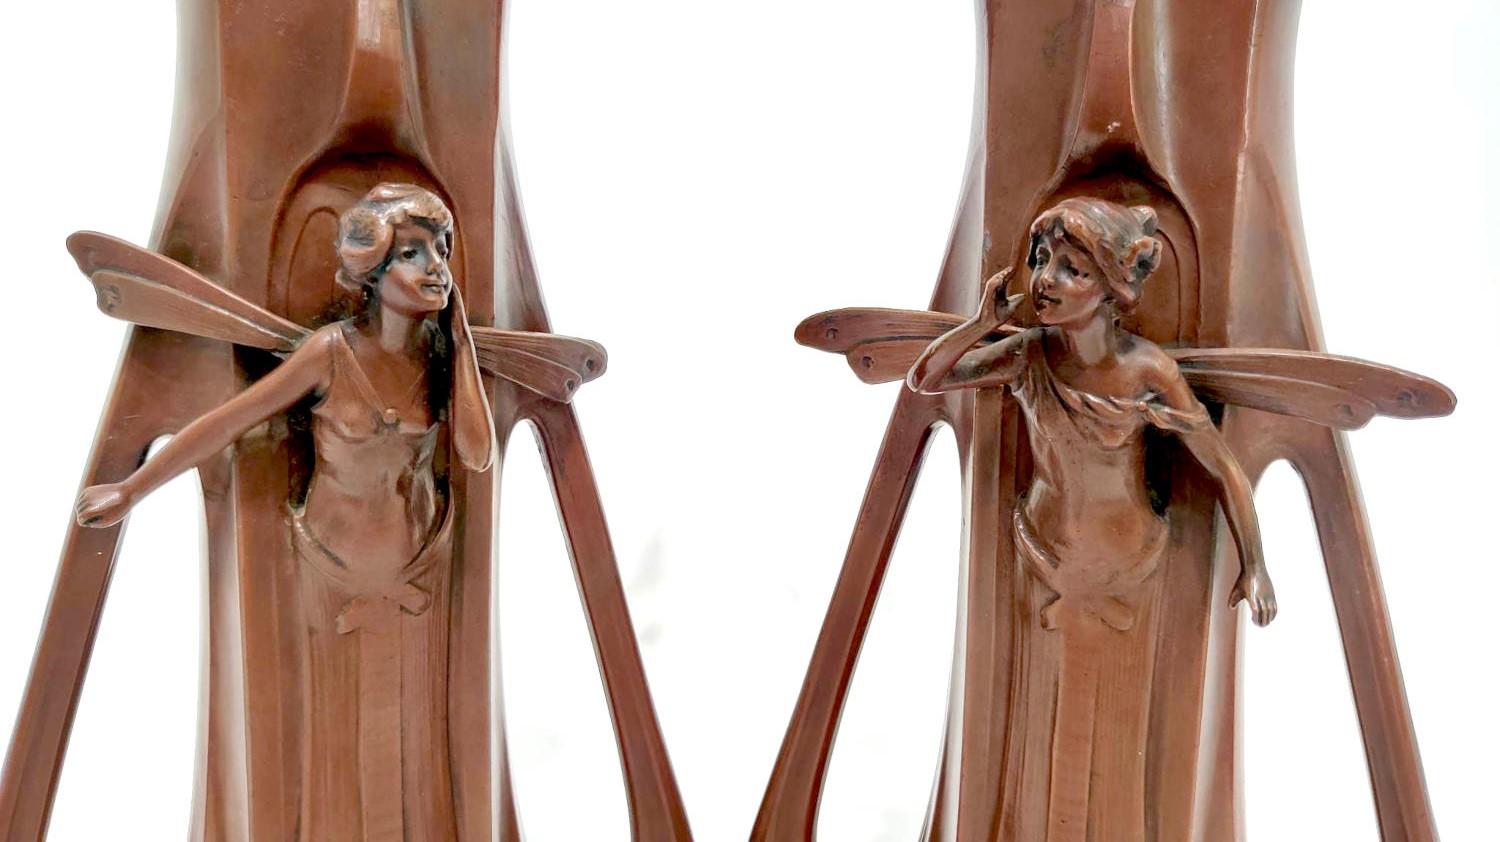 A charming pair of Art Nouveau vases featuring a pair of fairies. One of the fairies calls out to her partner, who listens from the other vase. The reverse of the vases each has a daisy to the back. The vases have elegant flowing art nouveau lines